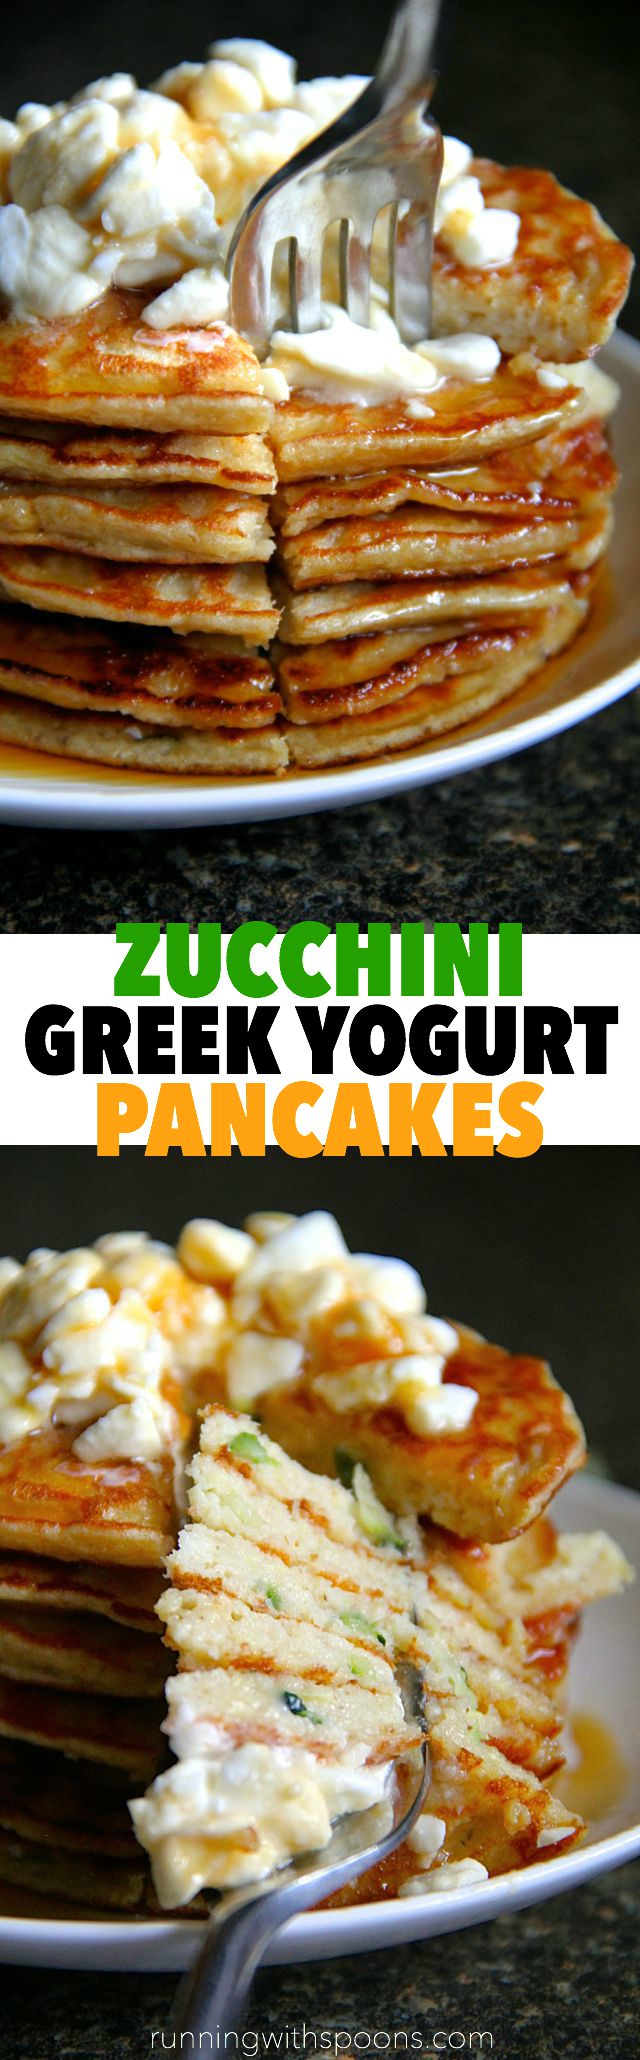 Zucchini Greek Yogurt Pancakes -- light, fluffy, and gluten-free, enjoy the ENTIRE recipe for under 300 calories and 20g of protein! || runningwithspoons.com #glutenfree #breakfast